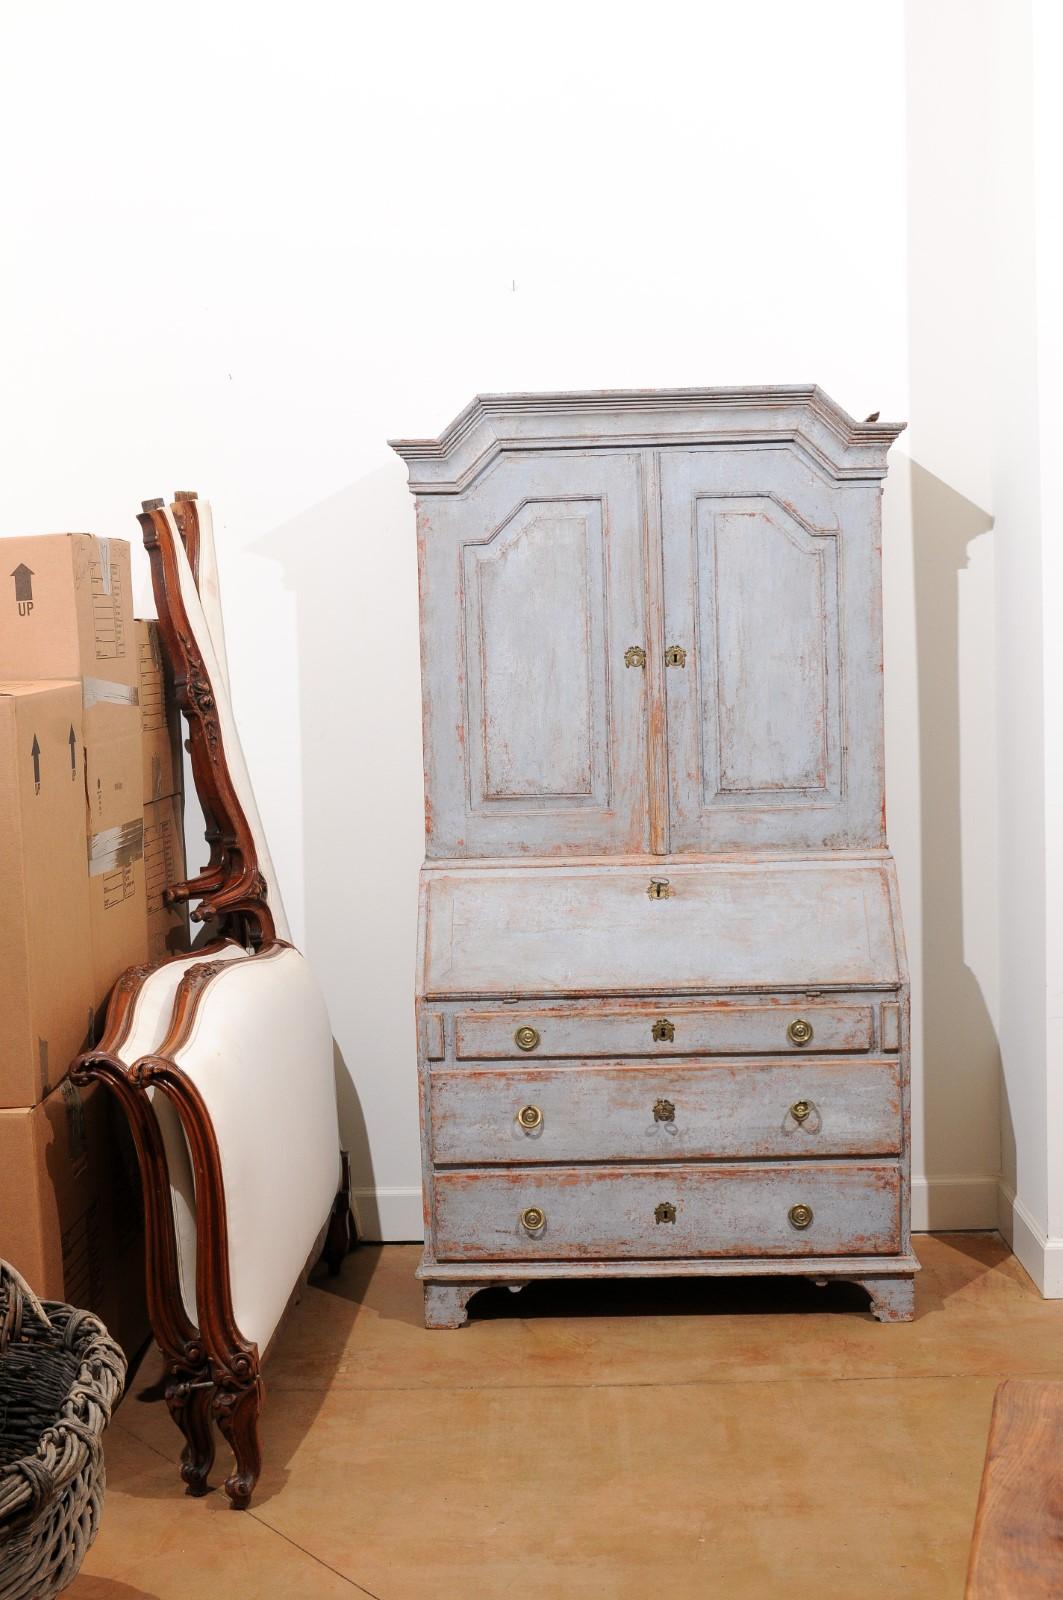 A Swedish Gustavian period tall secretary from the late 18th century, with distressed painted finish, two doors and slanted desk. Created in Sweden during the last years of the 18th century, this tall secretary features a molded cornice sitting